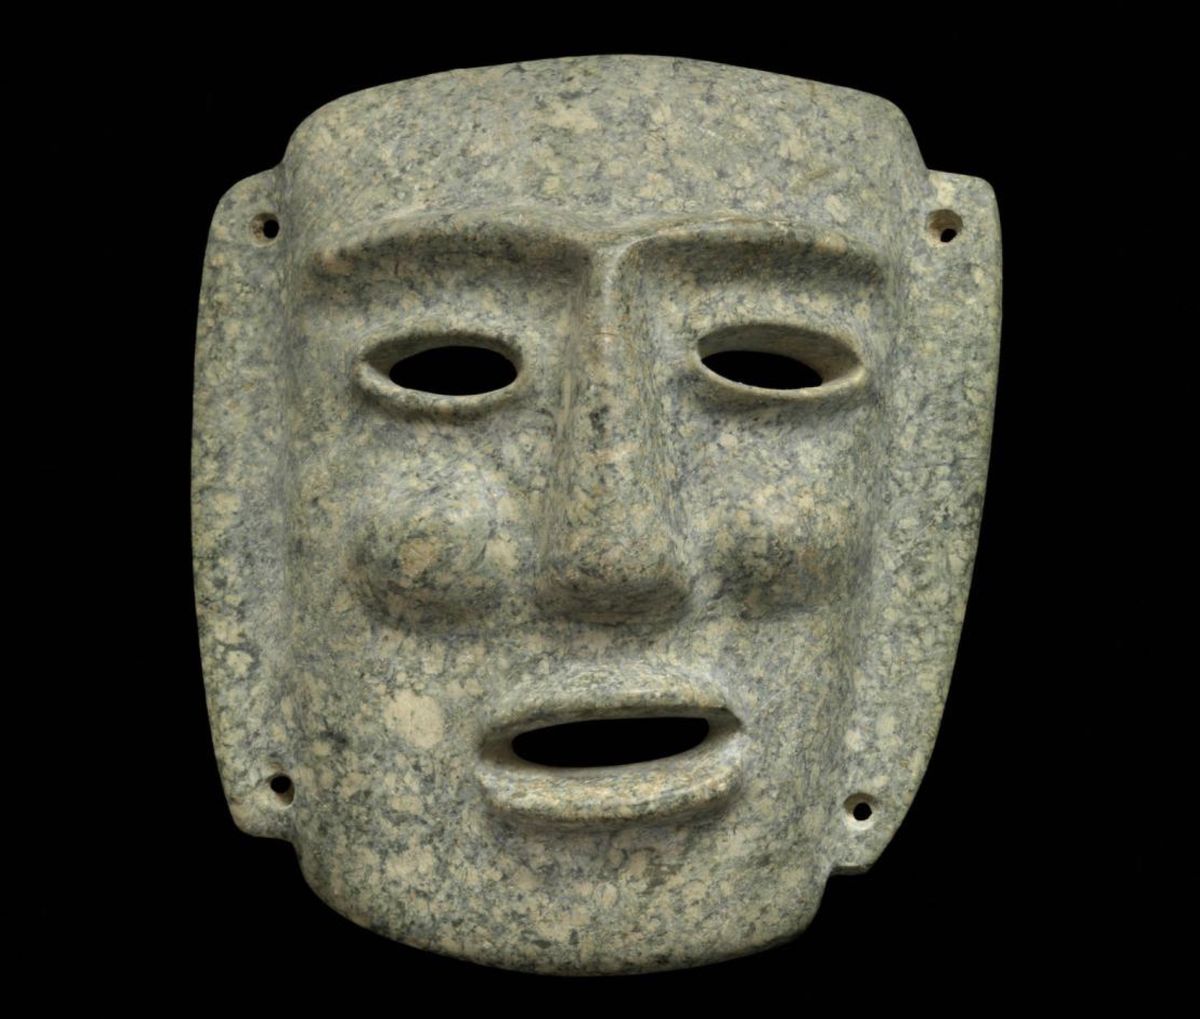 Mexico has objected to the sale of pre-Columbian artefacts in an auction scheduled to take place in Paris next week where objects, including this marble mask from 400BCE-100BCE, are to be sold Courtesy Millon

